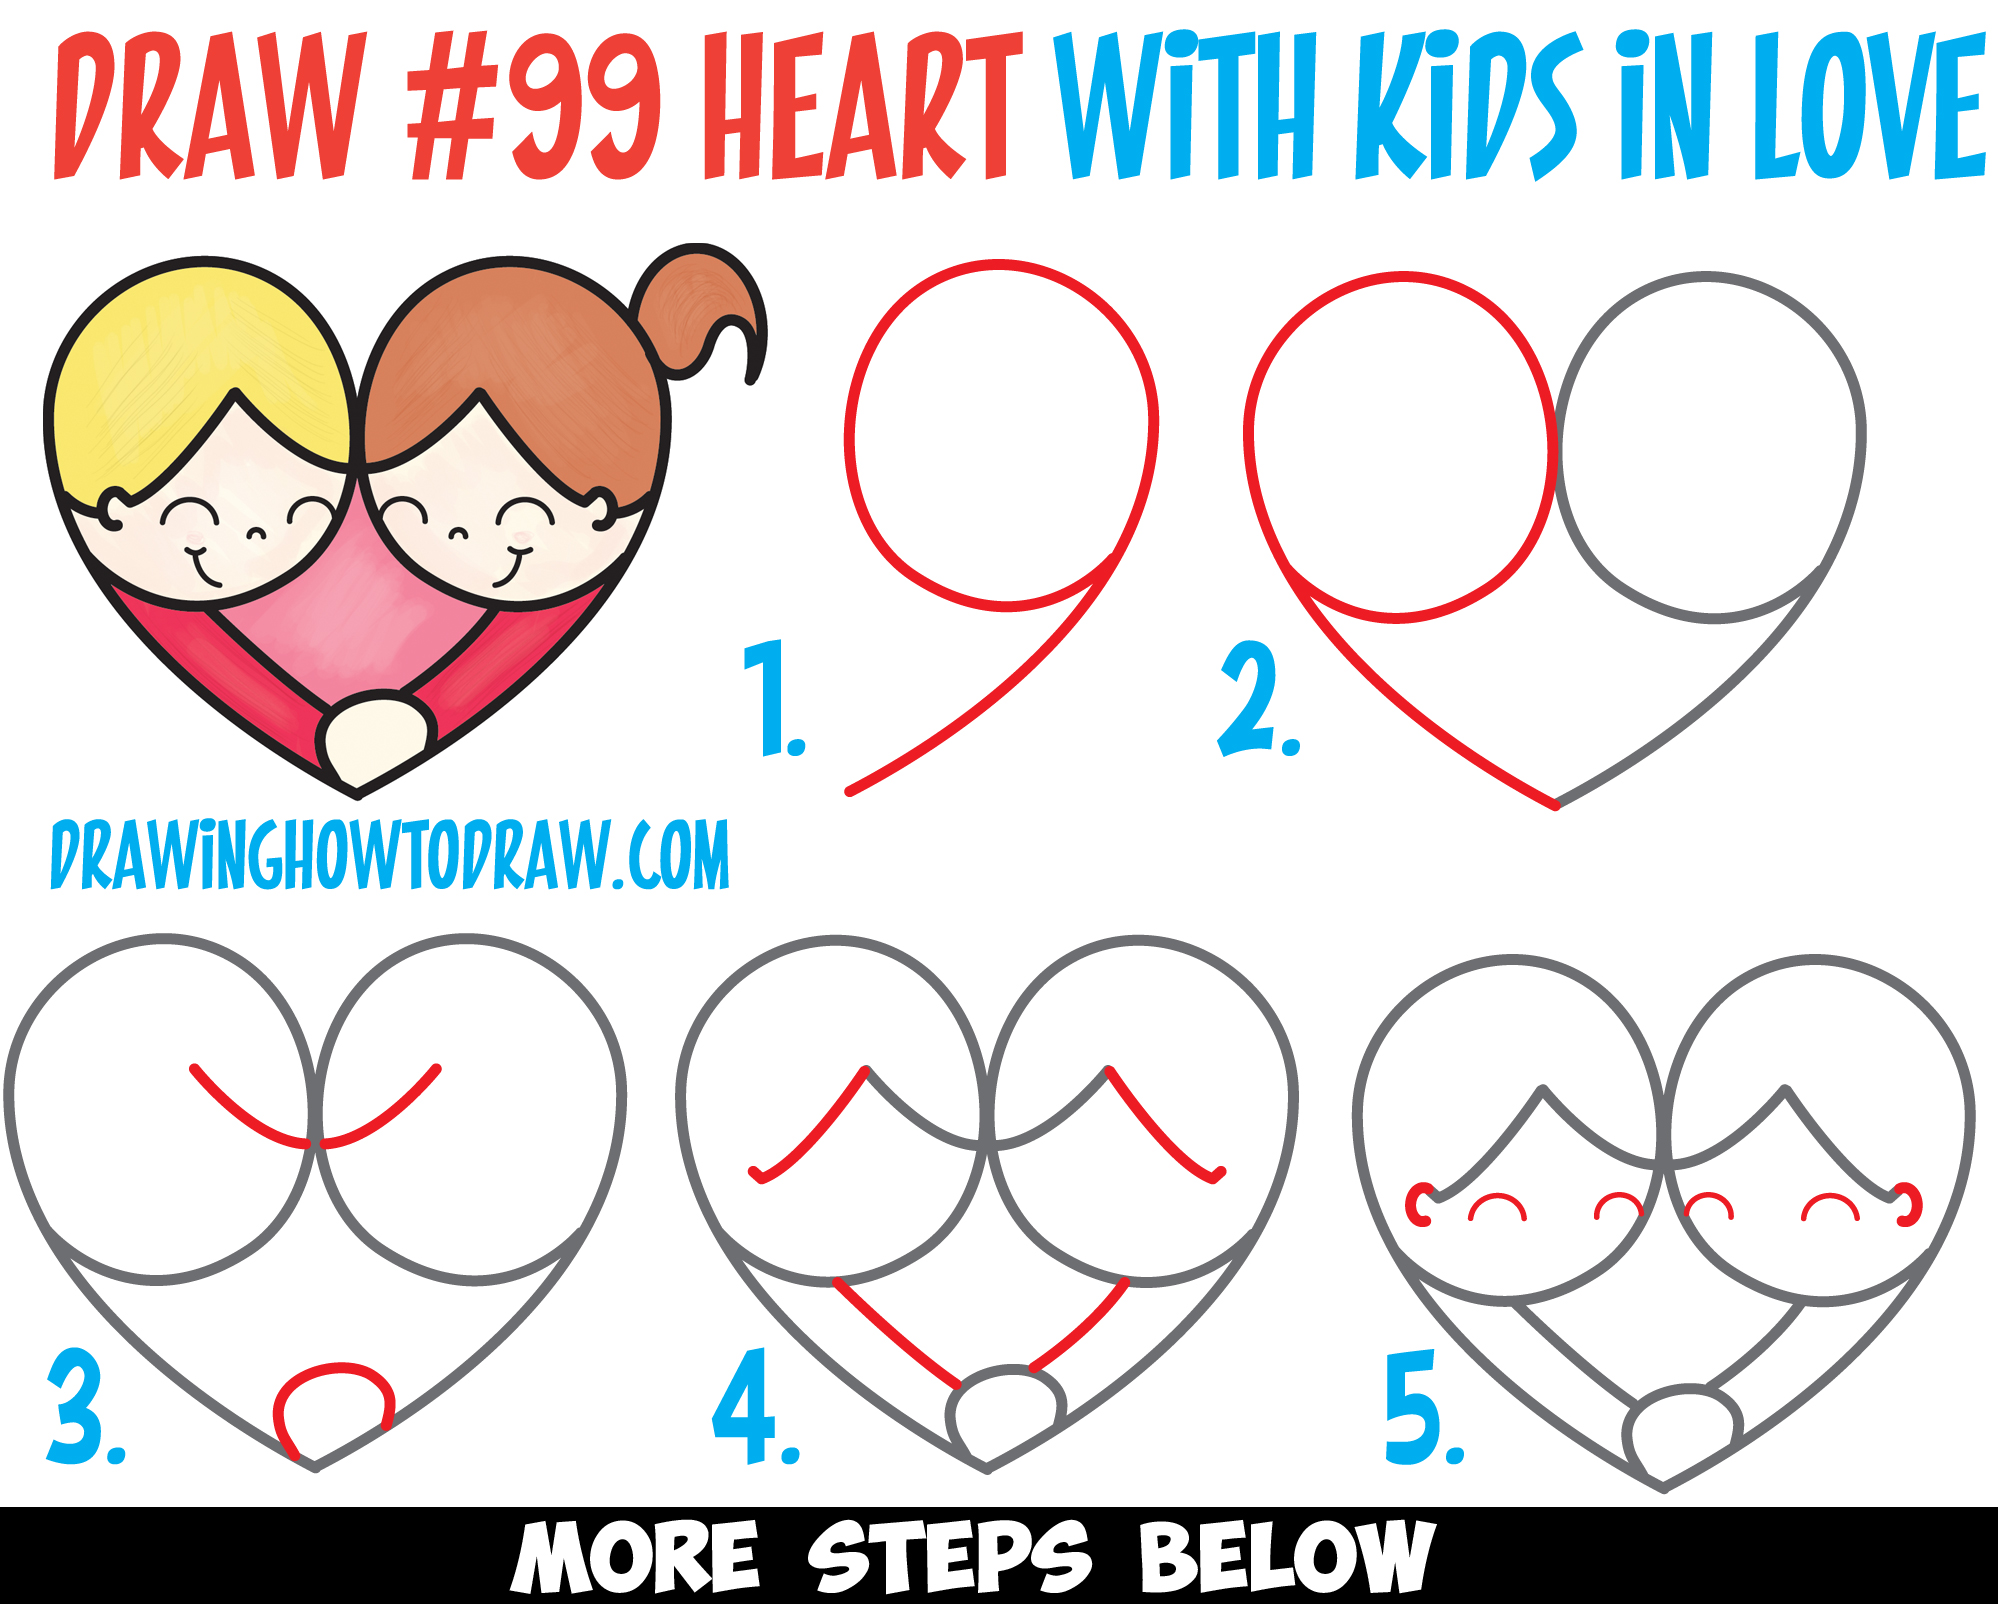 How to Draw Cartoon Kids Hugging to Form a Heart from #99 Shape Easy Step by Step Drawing Tutorial for Kids